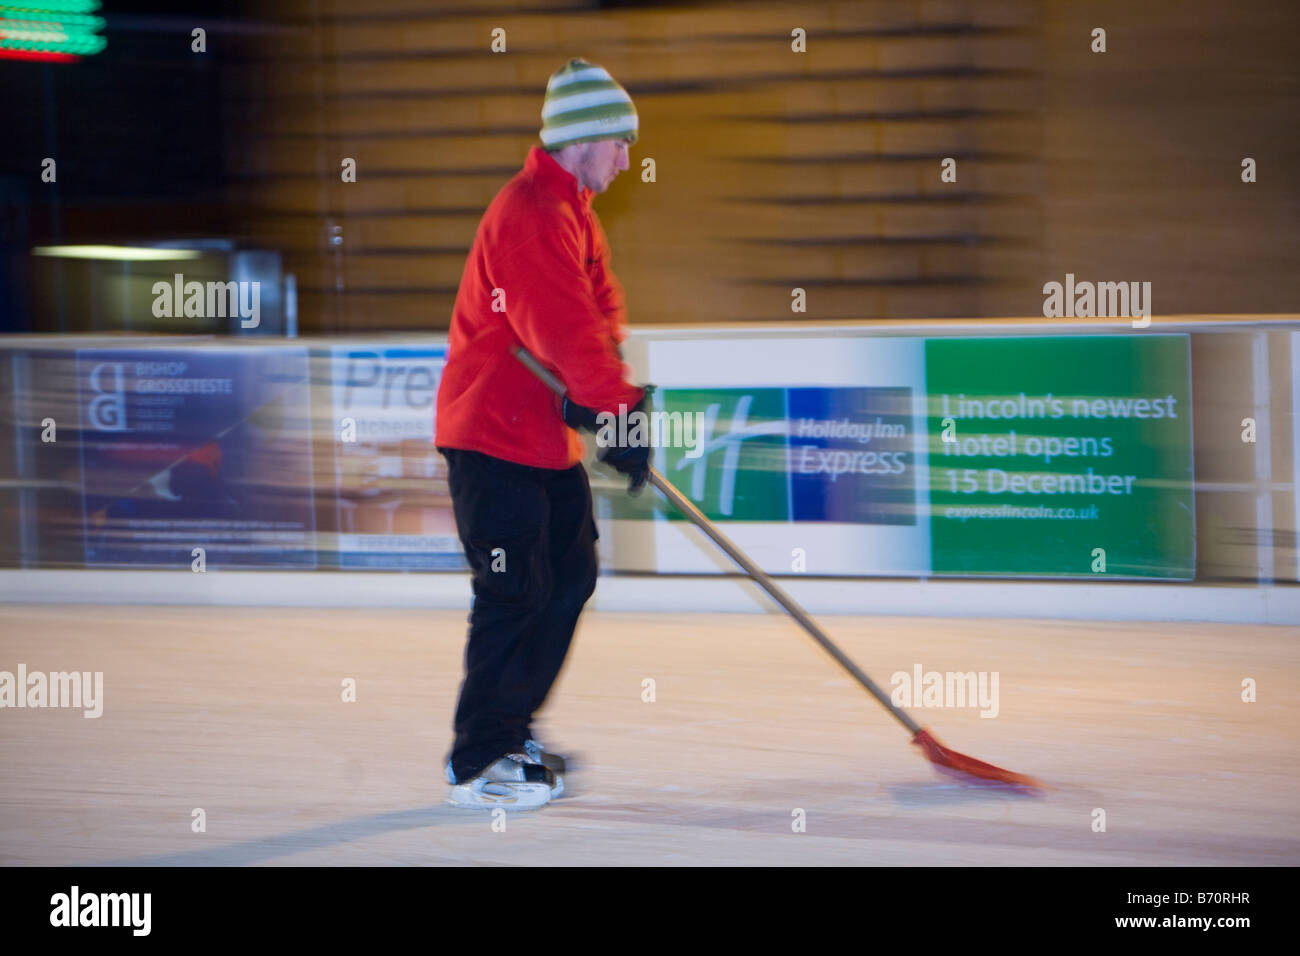 A member of Staff prepares the ice for skaters on an artificial ice rink in Lincoln city centre UK Stock Photo